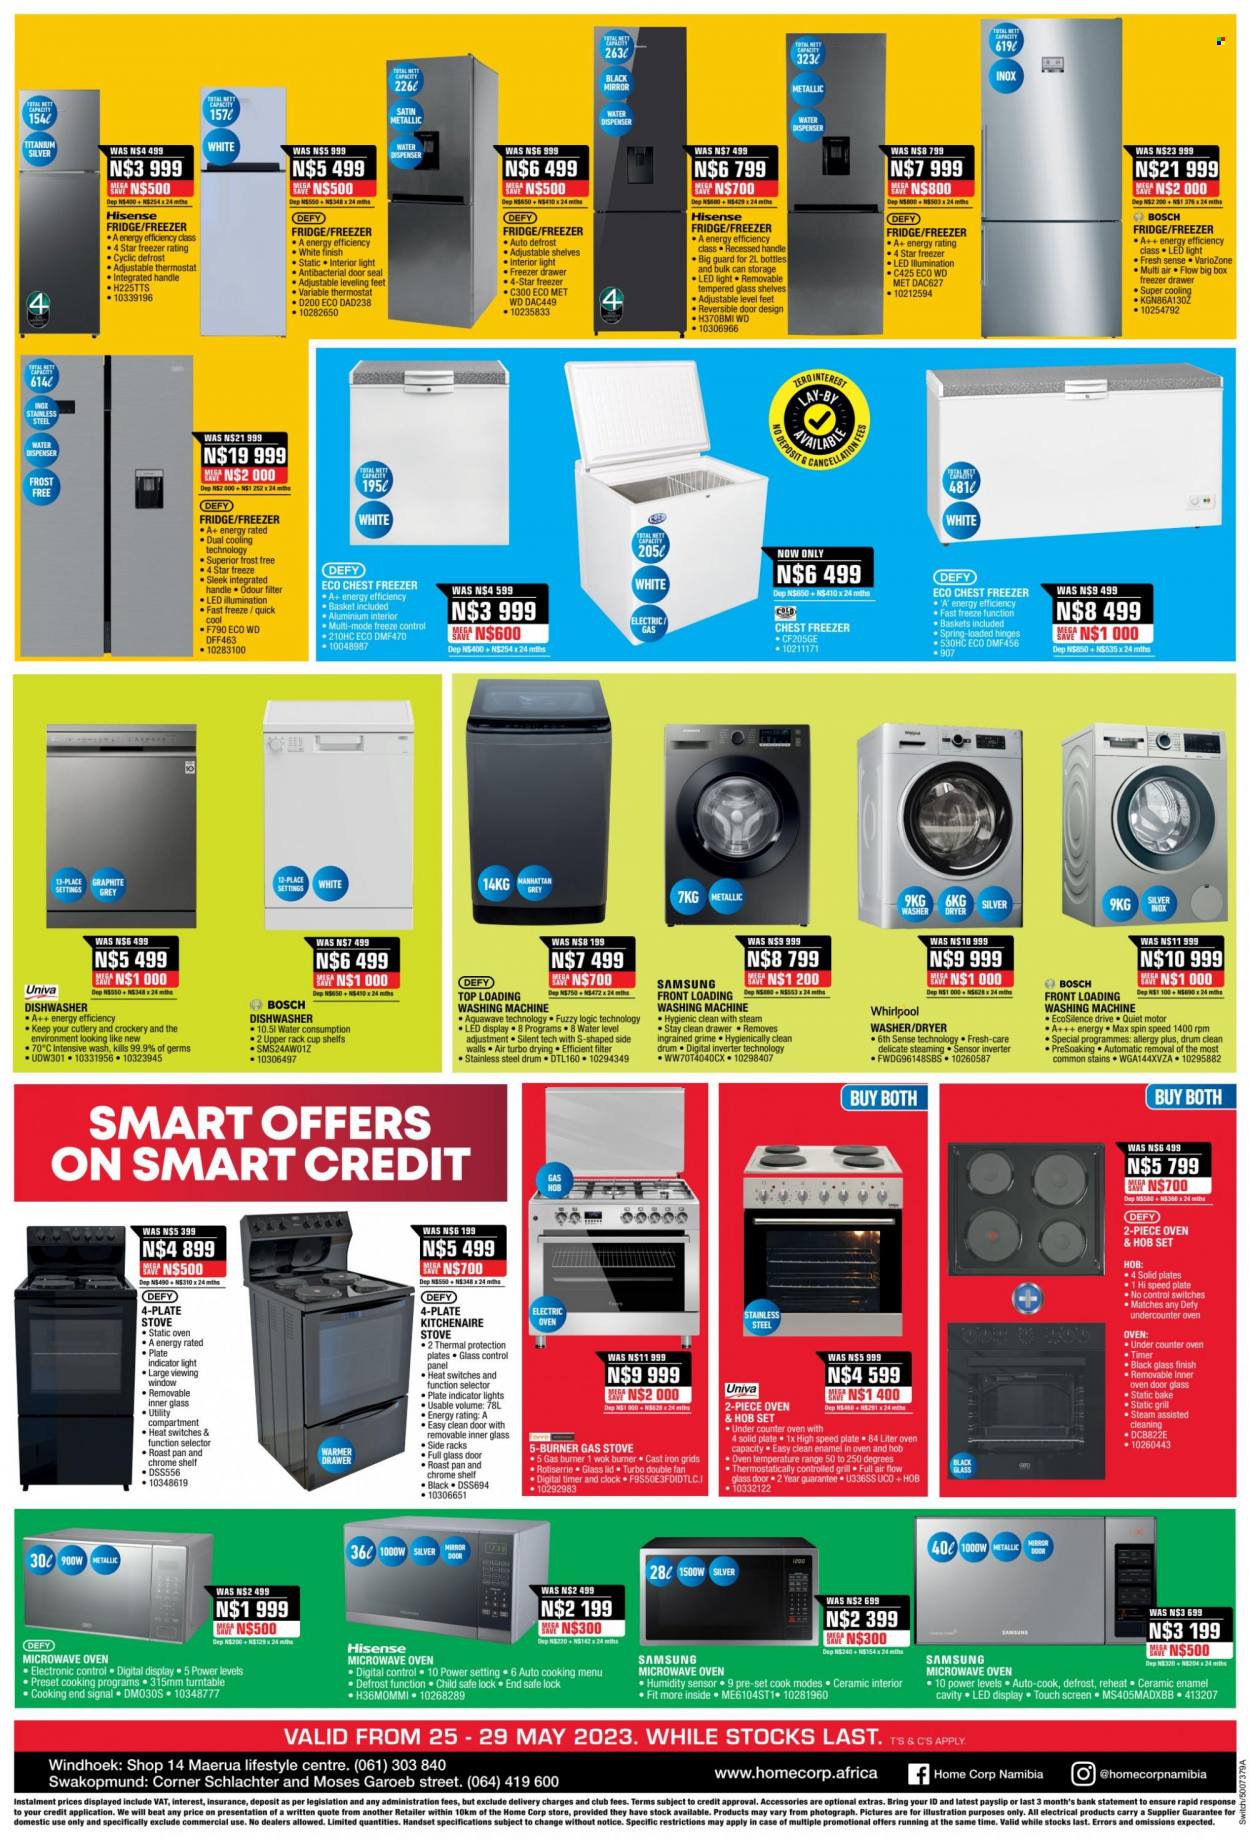 thumbnail - HomeCorp catalogue  - 25/05/2023 - 29/05/2023 - Sales products - shelves, mirror, Samsung, Hisense, freezer, chest freezer, refrigerator, fridge, Whirlpool, oven, stove, gas stove, microwave, hob, water dispenser, basket. Page 8.